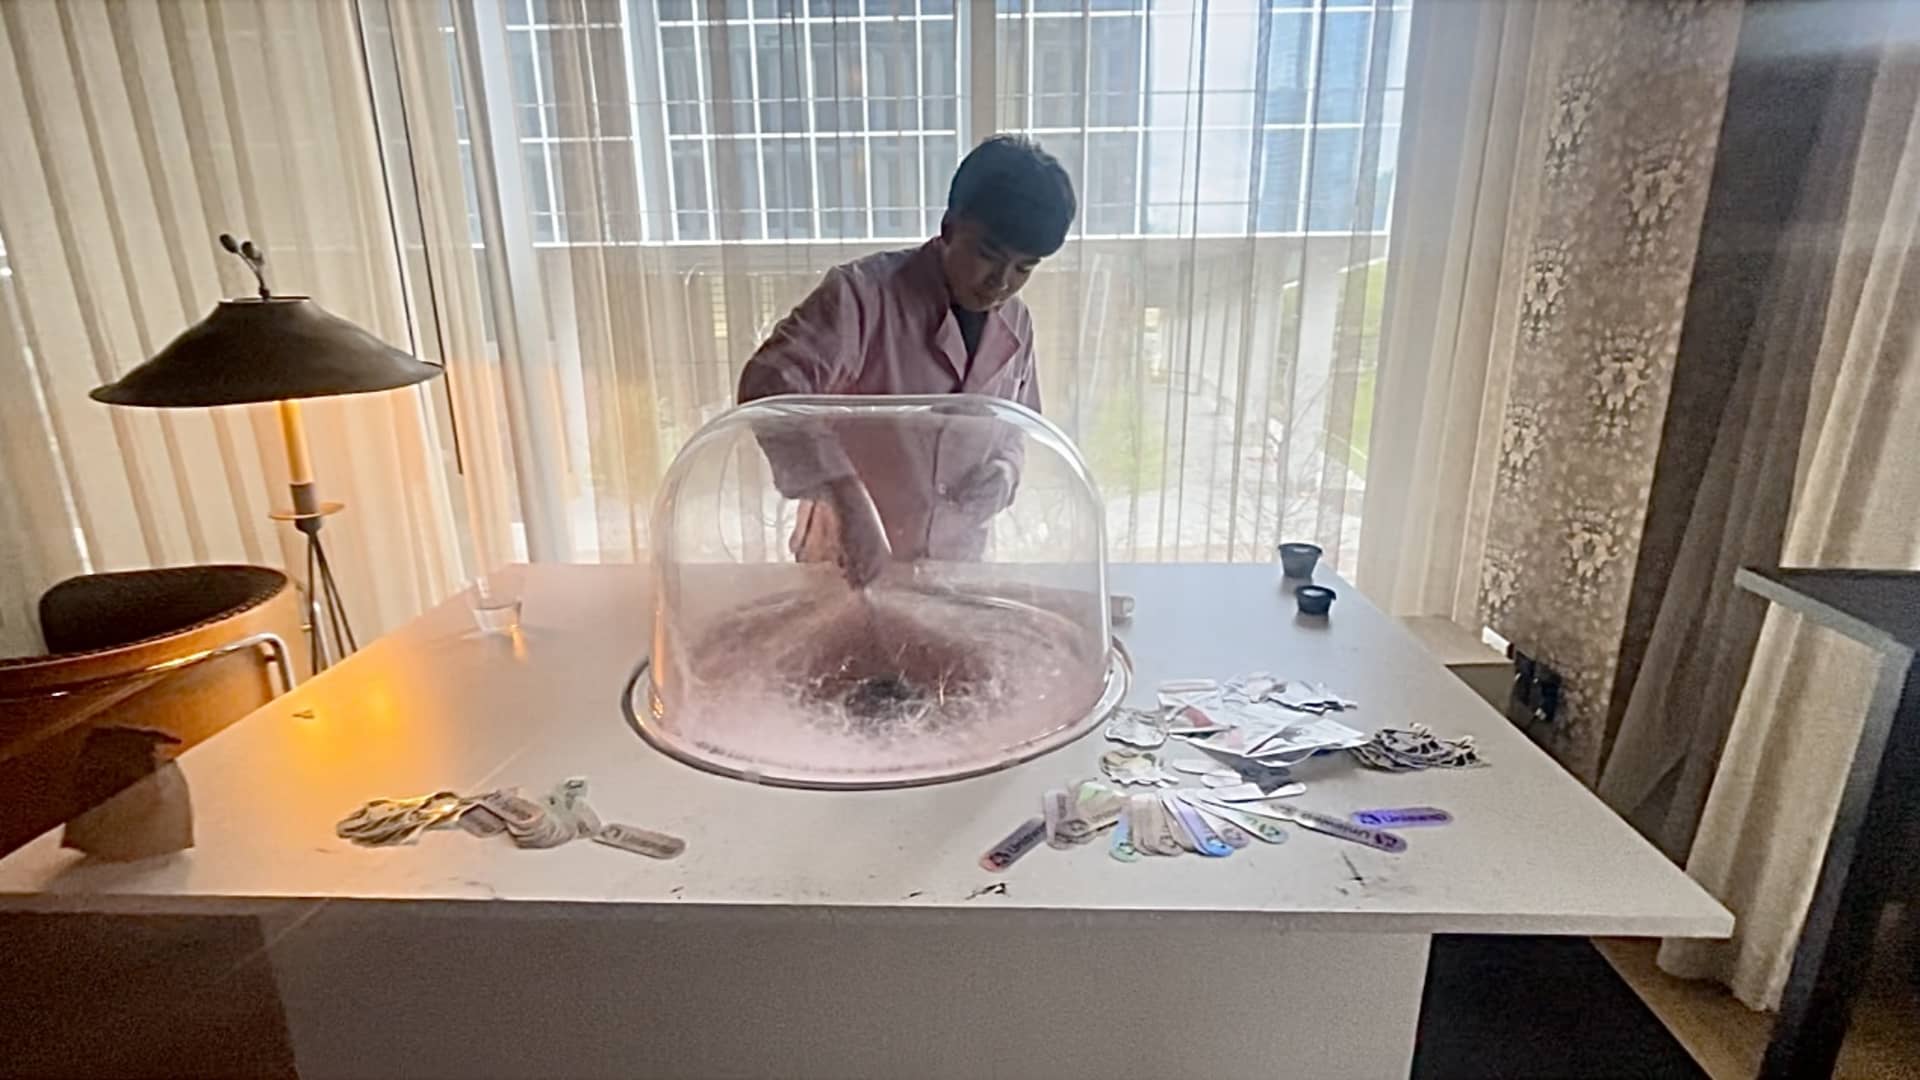 A cotton candy machine was part of the catering at the Boys Club's crypto conference on the sidelines of South by Southwest.